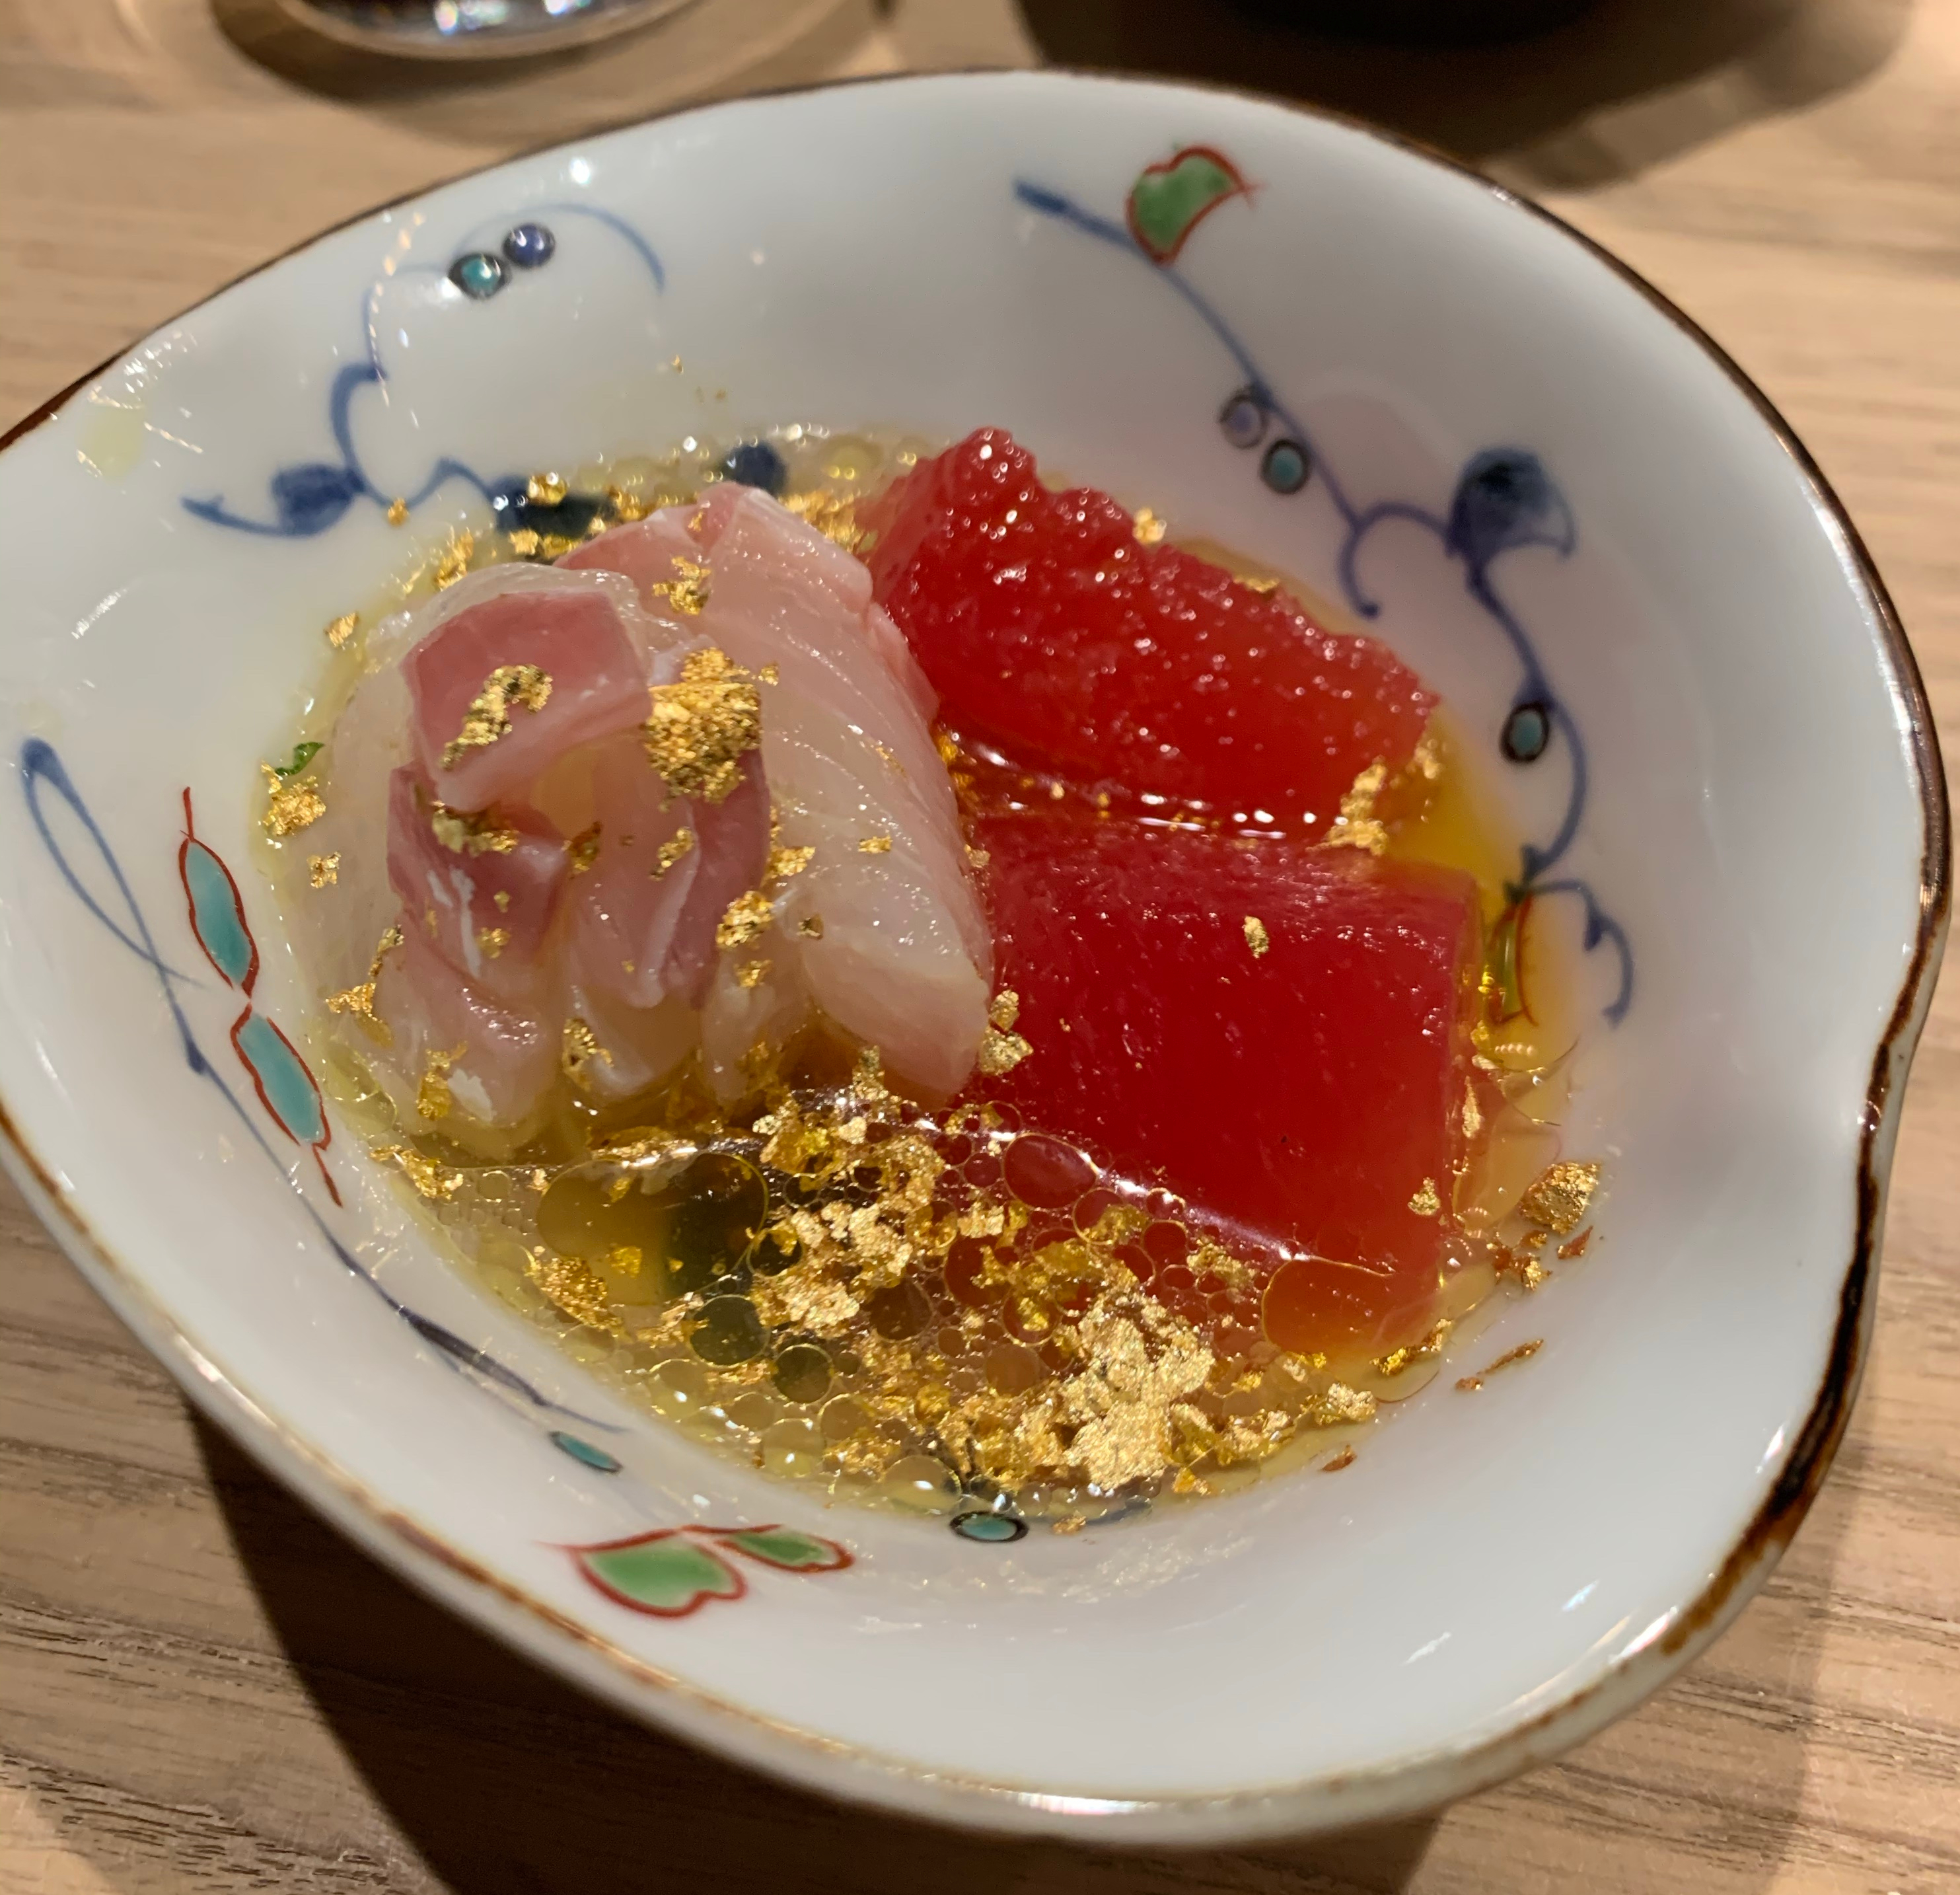 A plate with raw snapper and dark-red watermelon chunks poking out of a light-yellow broth. The whole thing has been covered in gold flakes.